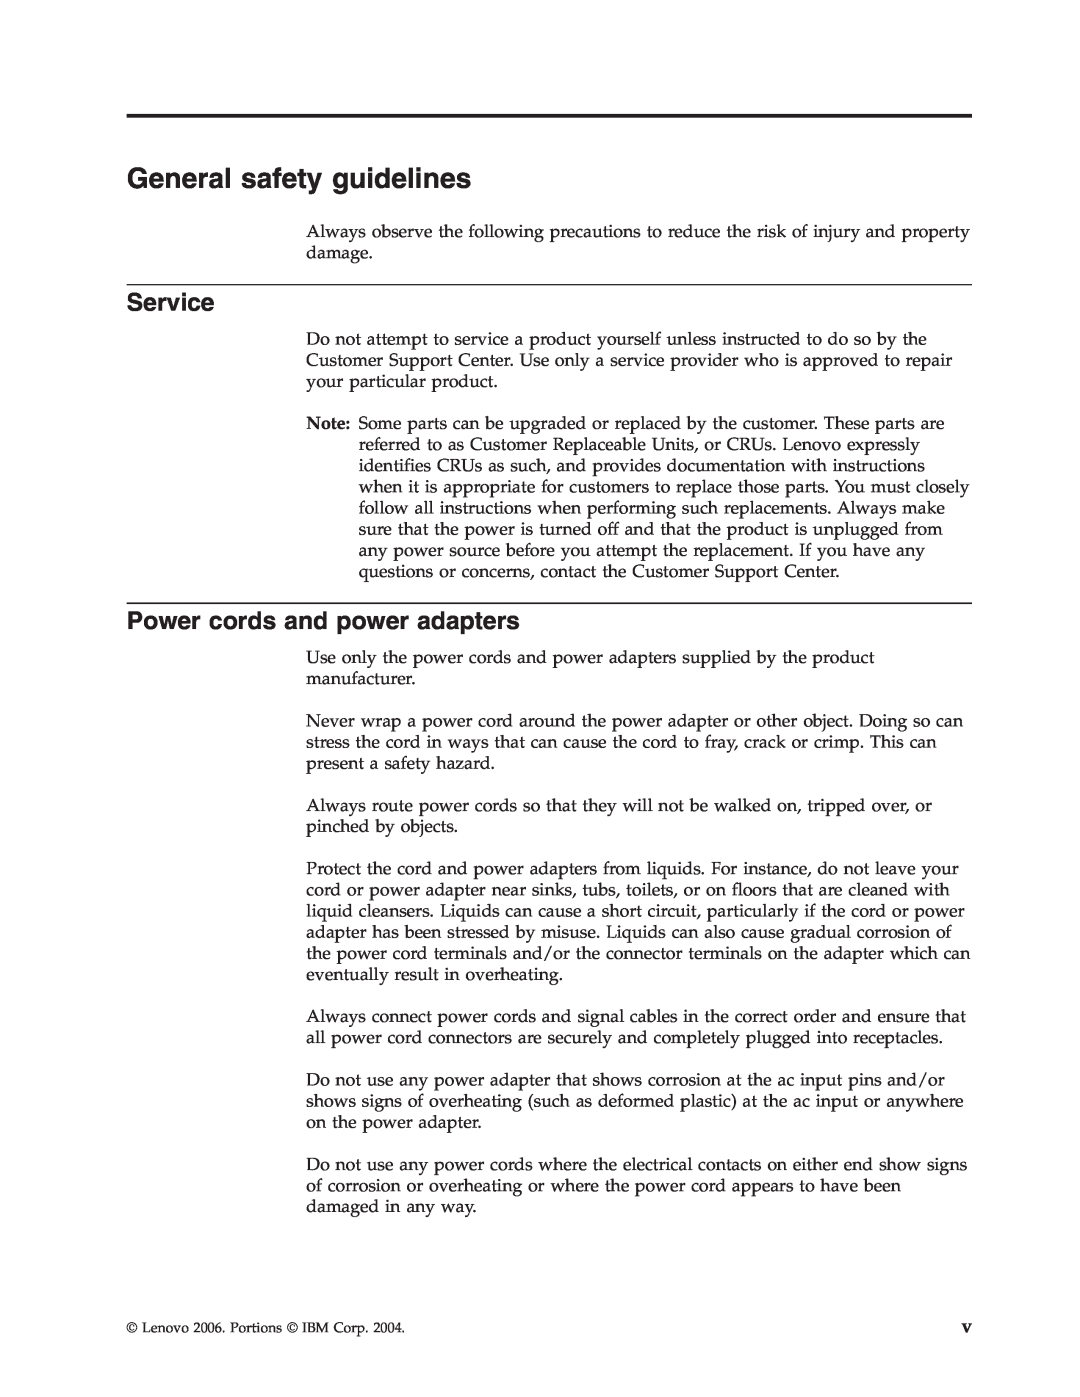 Lenovo 41N5624 manual General safety guidelines, Service, Power cords and power adapters 